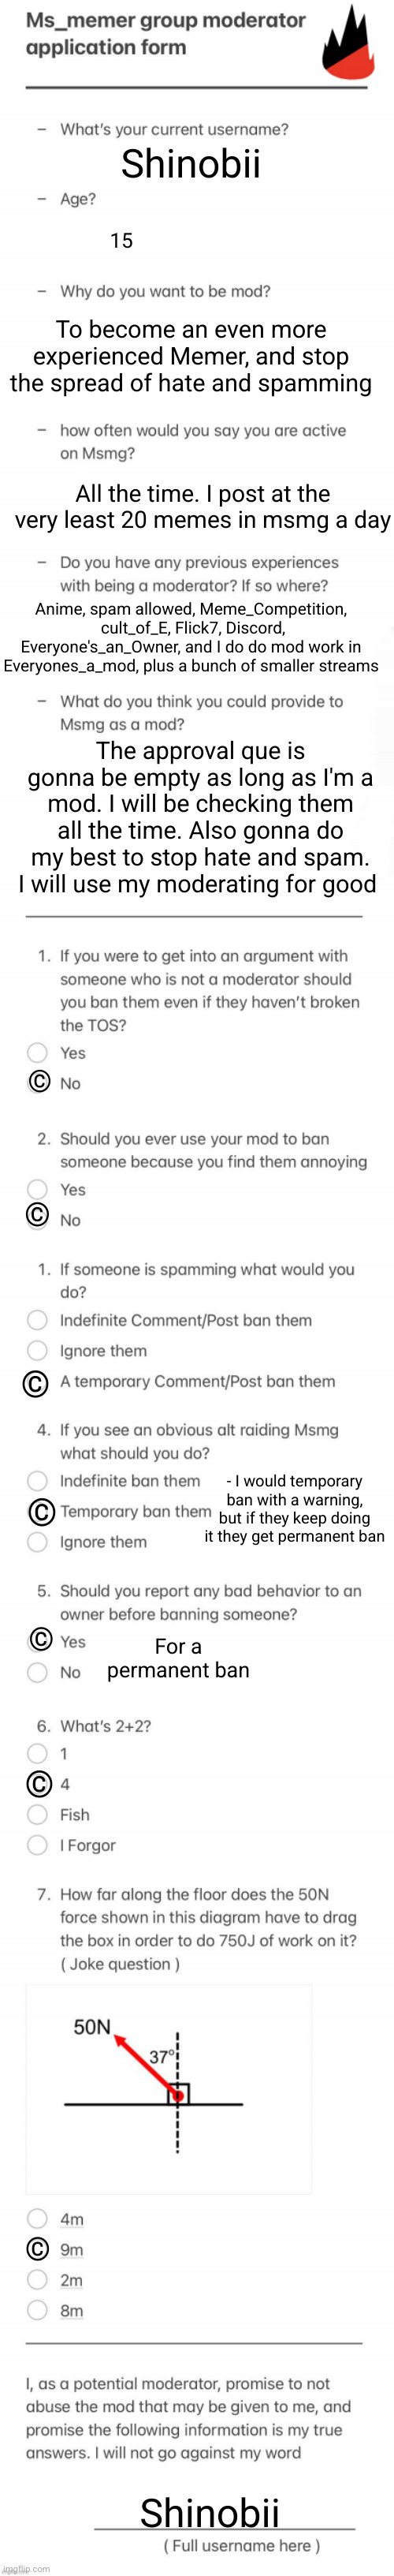 MSMG MOD FORM -Shinobii | Shinobii; 15; To become an even more experienced Memer, and stop the spread of hate and spamming; All the time. I post at the very least 20 memes in msmg a day; Anime, spam allowed, Meme_Competition,  cult_of_E, Flick7, Discord, Everyone's_an_Owner, and I do do mod work in Everyones_a_mod, plus a bunch of smaller streams; The approval que is gonna be empty as long as I'm a mod. I will be checking them all the time. Also gonna do my best to stop hate and spam. I will use my moderating for good; ©; ©; ©; - I would temporary ban with a warning, but if they keep doing it they get permanent ban; ©; For a permanent ban; ©; ©; ©; Shinobii | image tagged in updated msmg mod form,msmg,moderators,mods | made w/ Imgflip meme maker